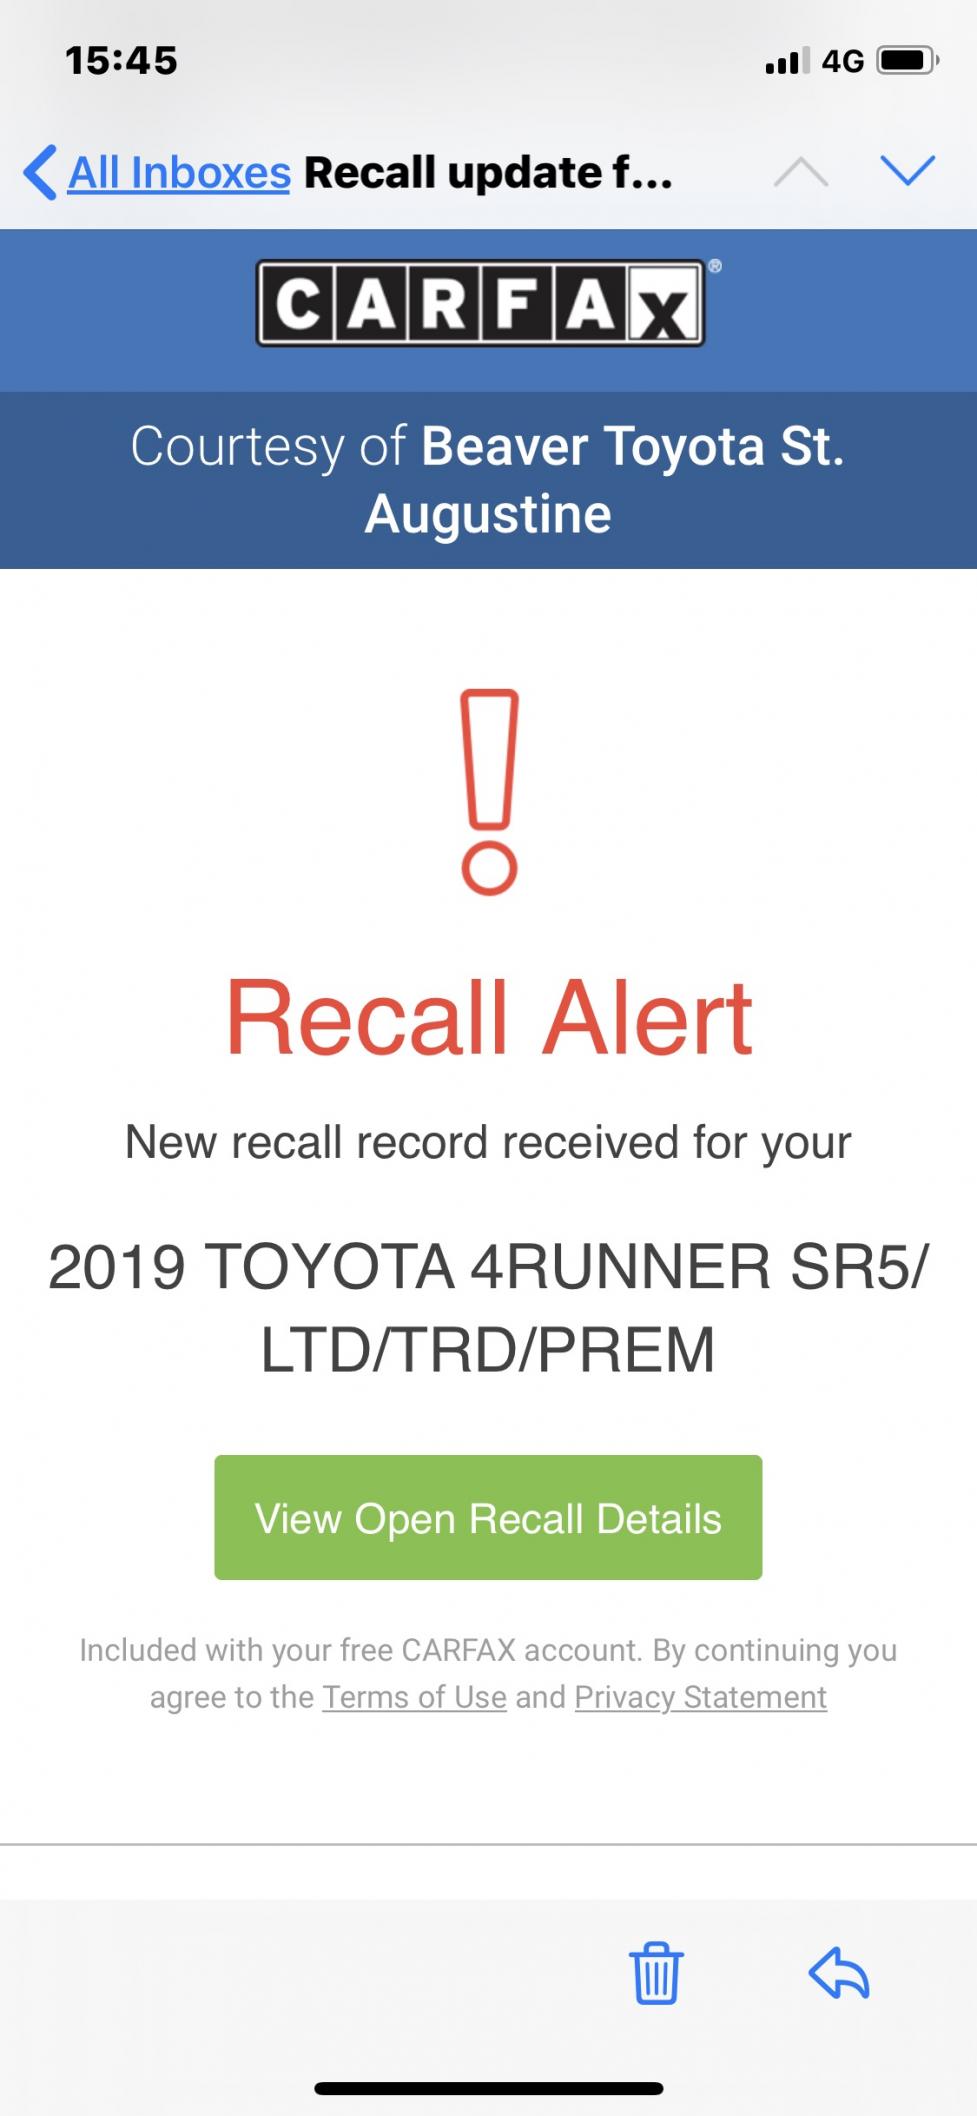 Toyota Fuel System Recall-14feee6d-dede-45ee-b491-a10855607bfd-jpg